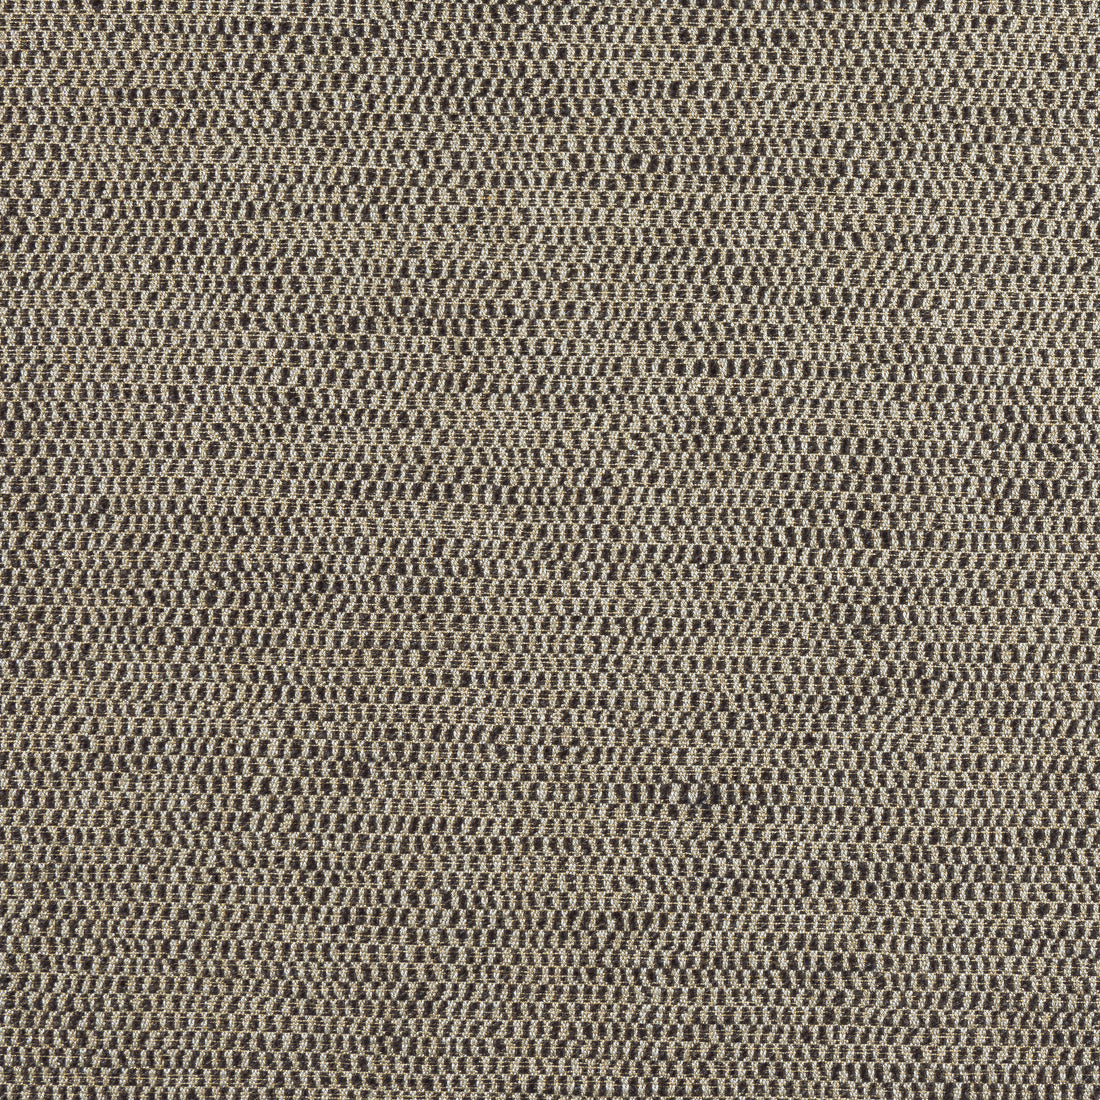 Rito fabric in smoke color - pattern number W8117 - by Thibaut in the Sereno collection